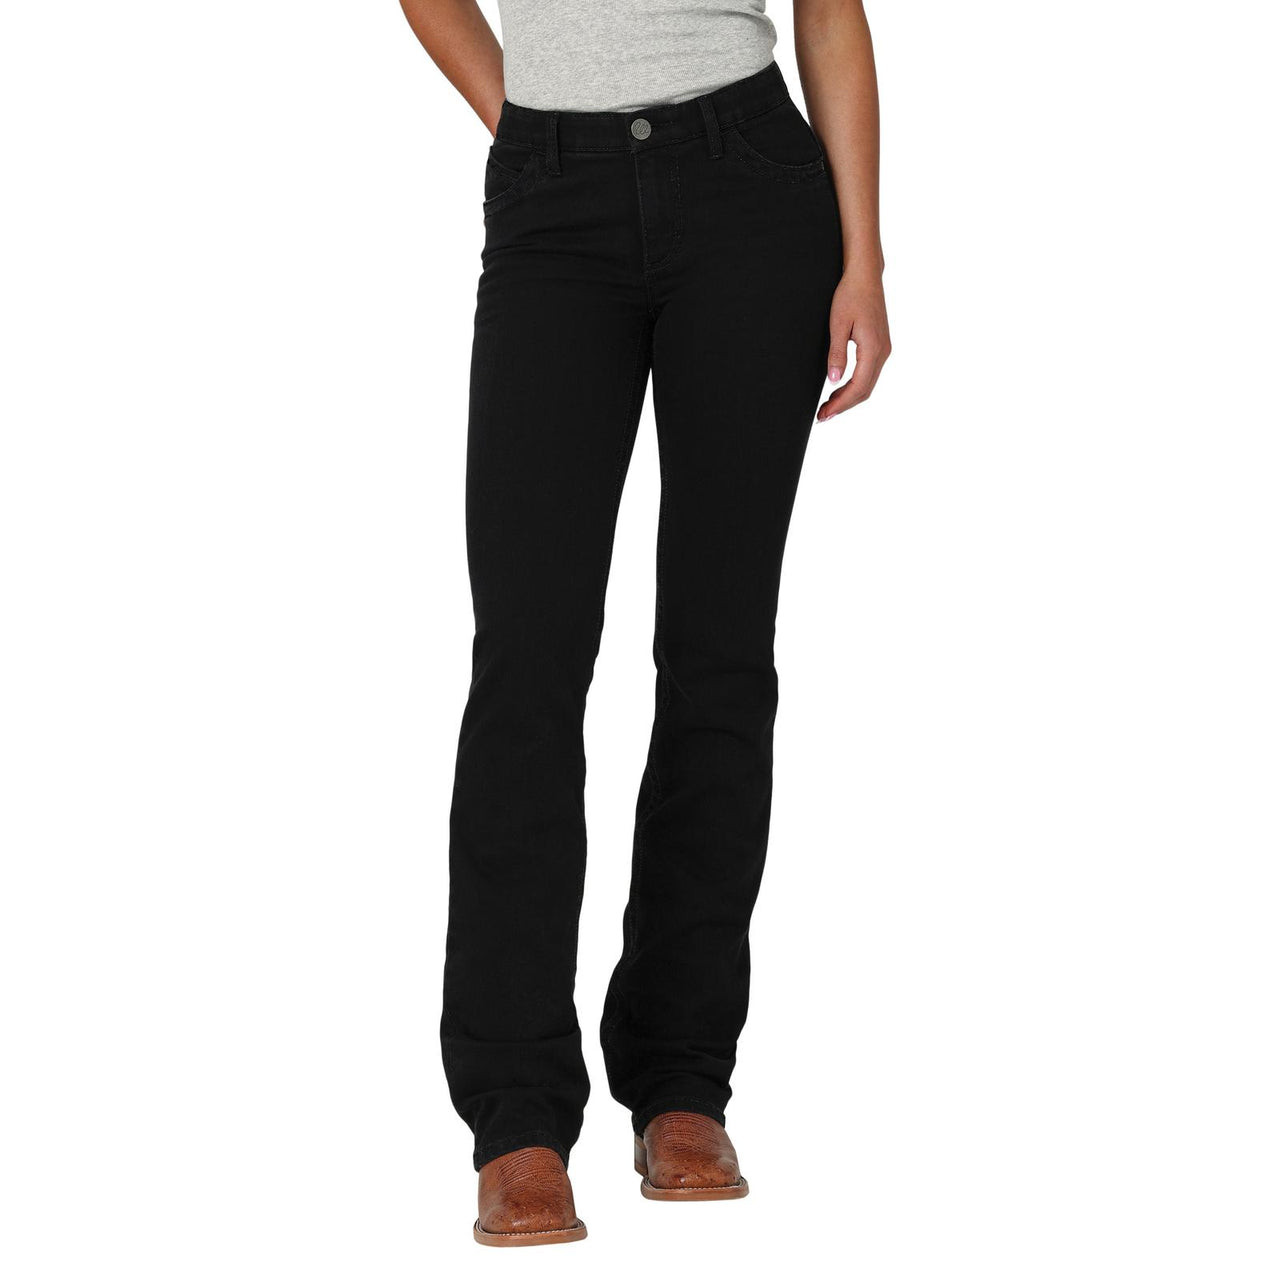 Wrangler Women's Ultimate Riding Willow Bootcut Jeans - Molly